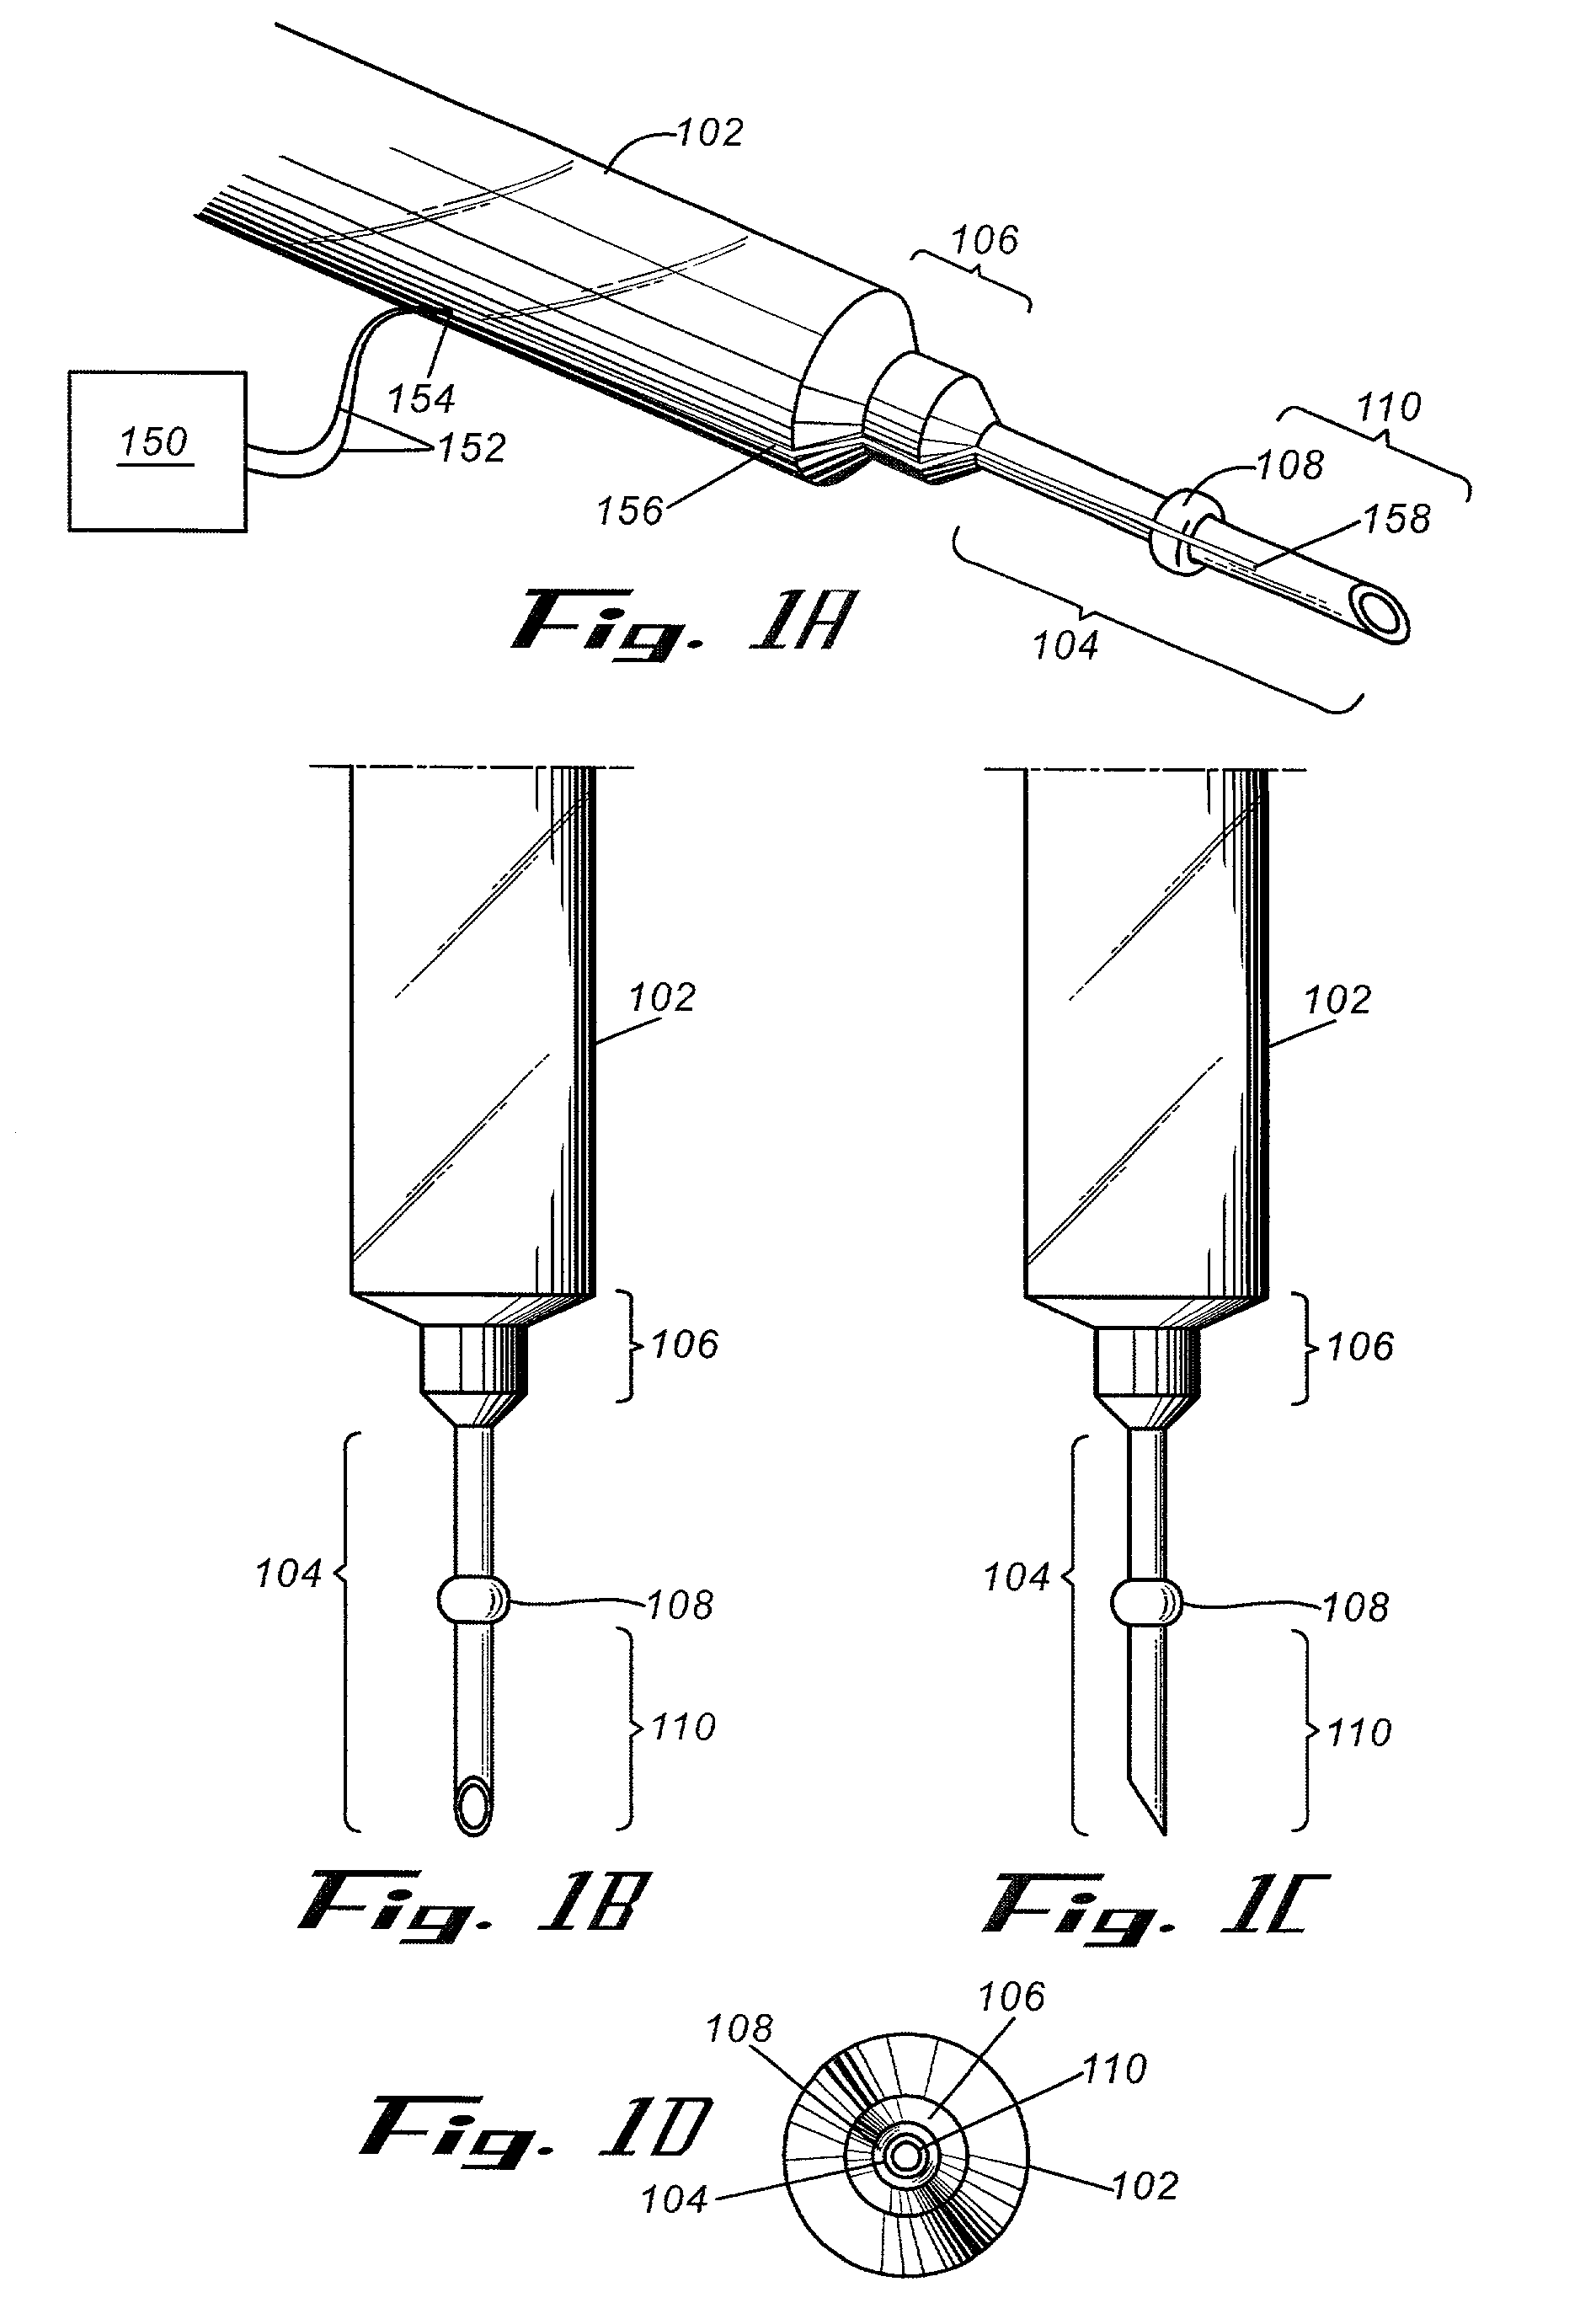 Apparatuses and methods for transcleral cautery and subretinal drainage